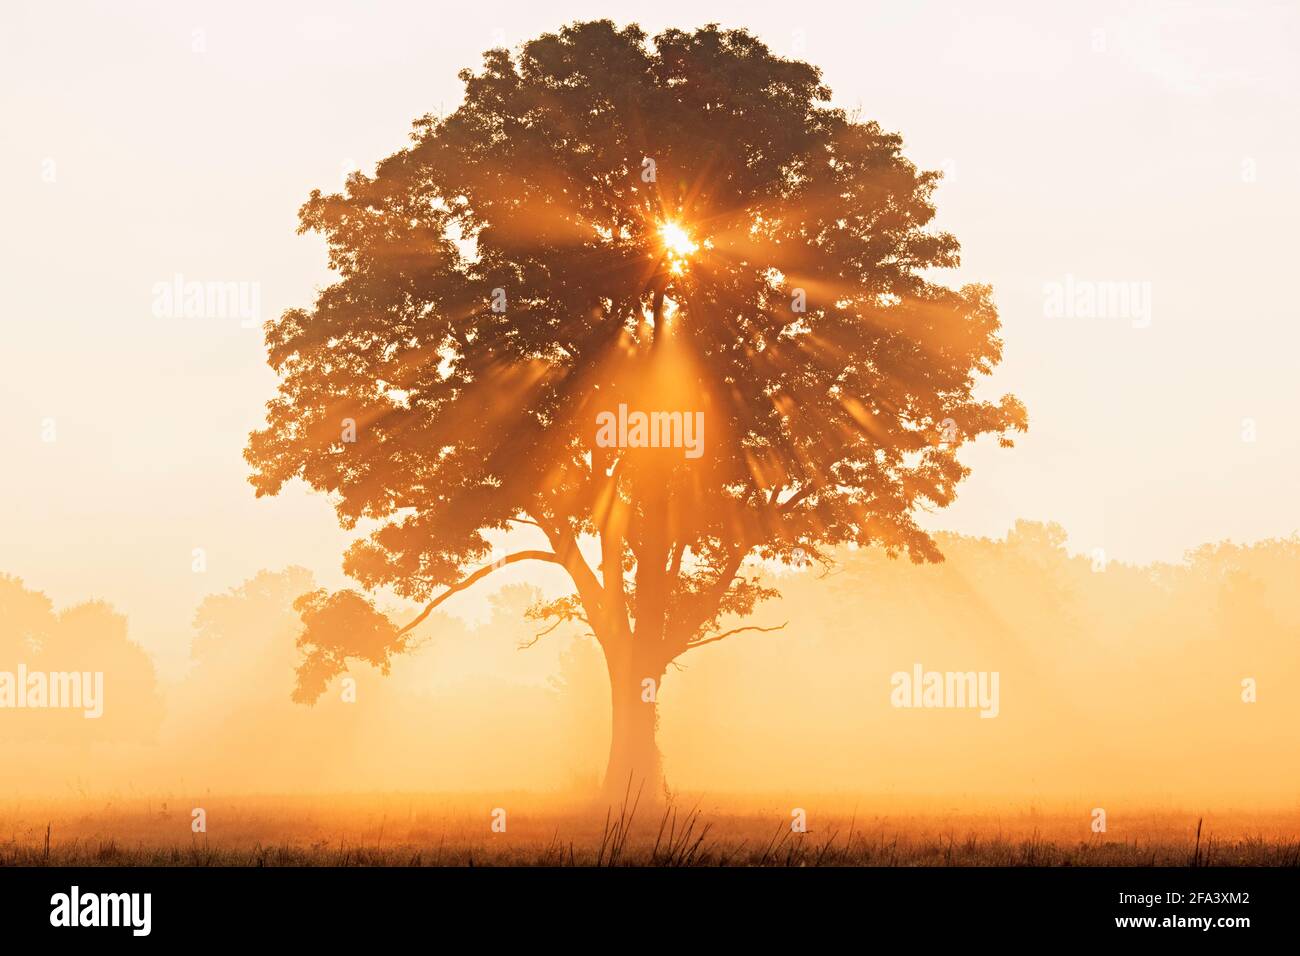 Majestic oak tree at sunrise with golden mist rising and sun rays emanating through tree branches Stock Photo